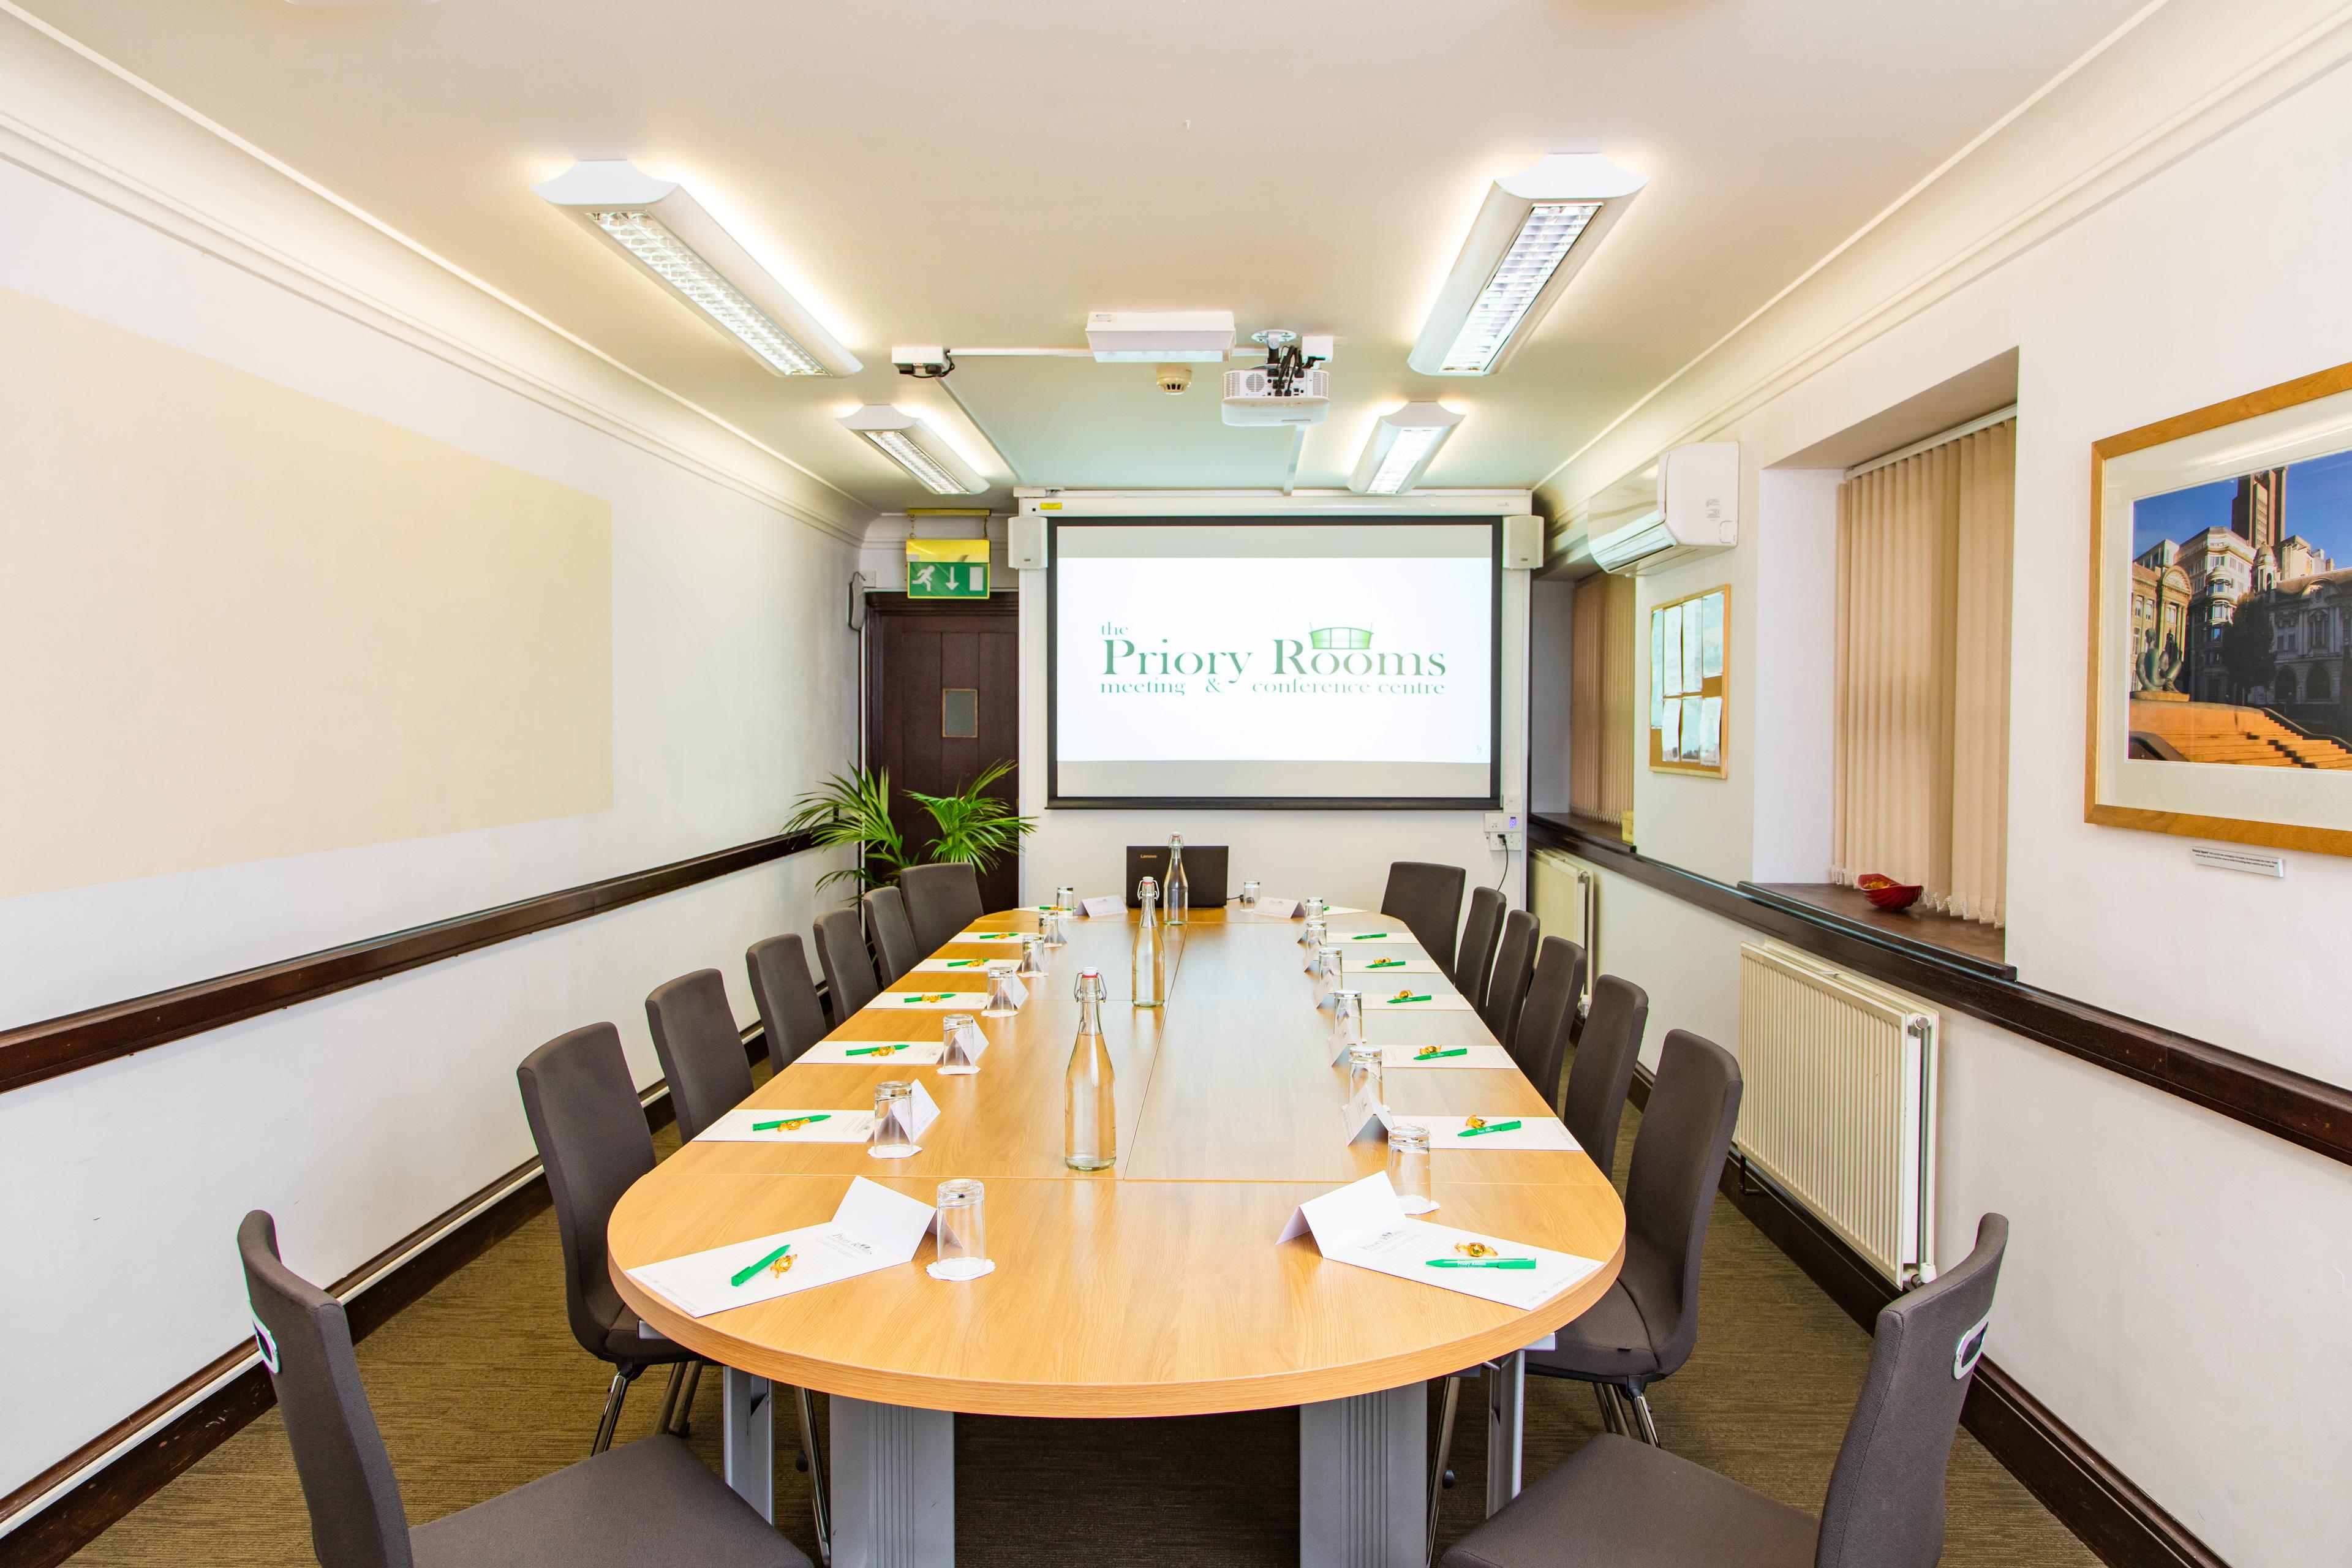 The Priory Rooms Meeting & Conference Centre, Lloyd Room photo #1